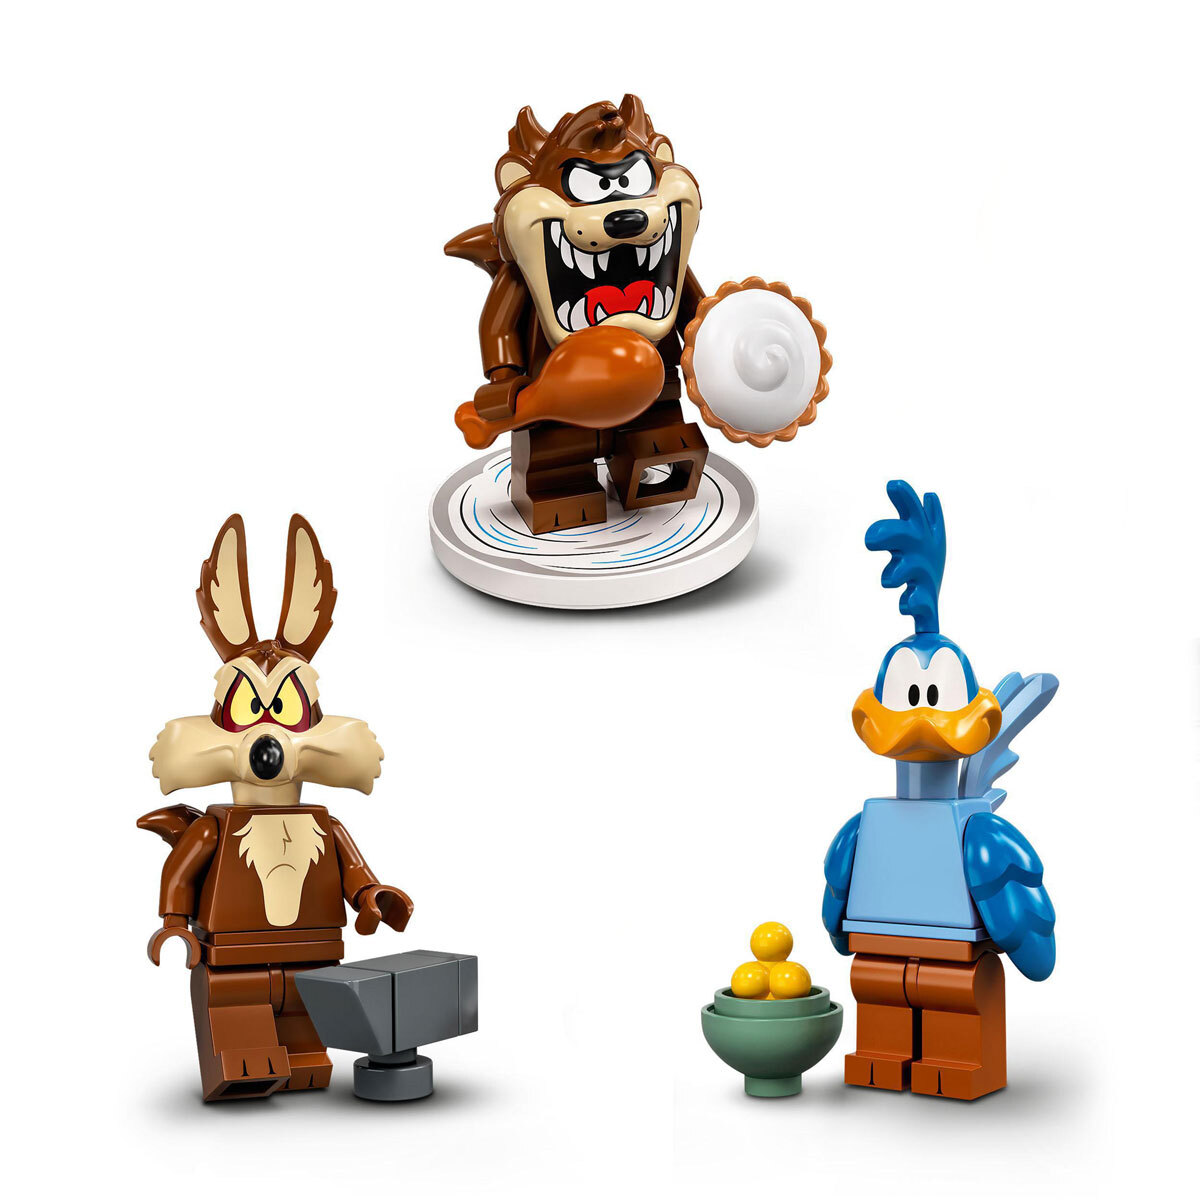 Buy LEGO Minifigures Looney Tunes 71030 Close-up 3 Image at Costco.co.uk